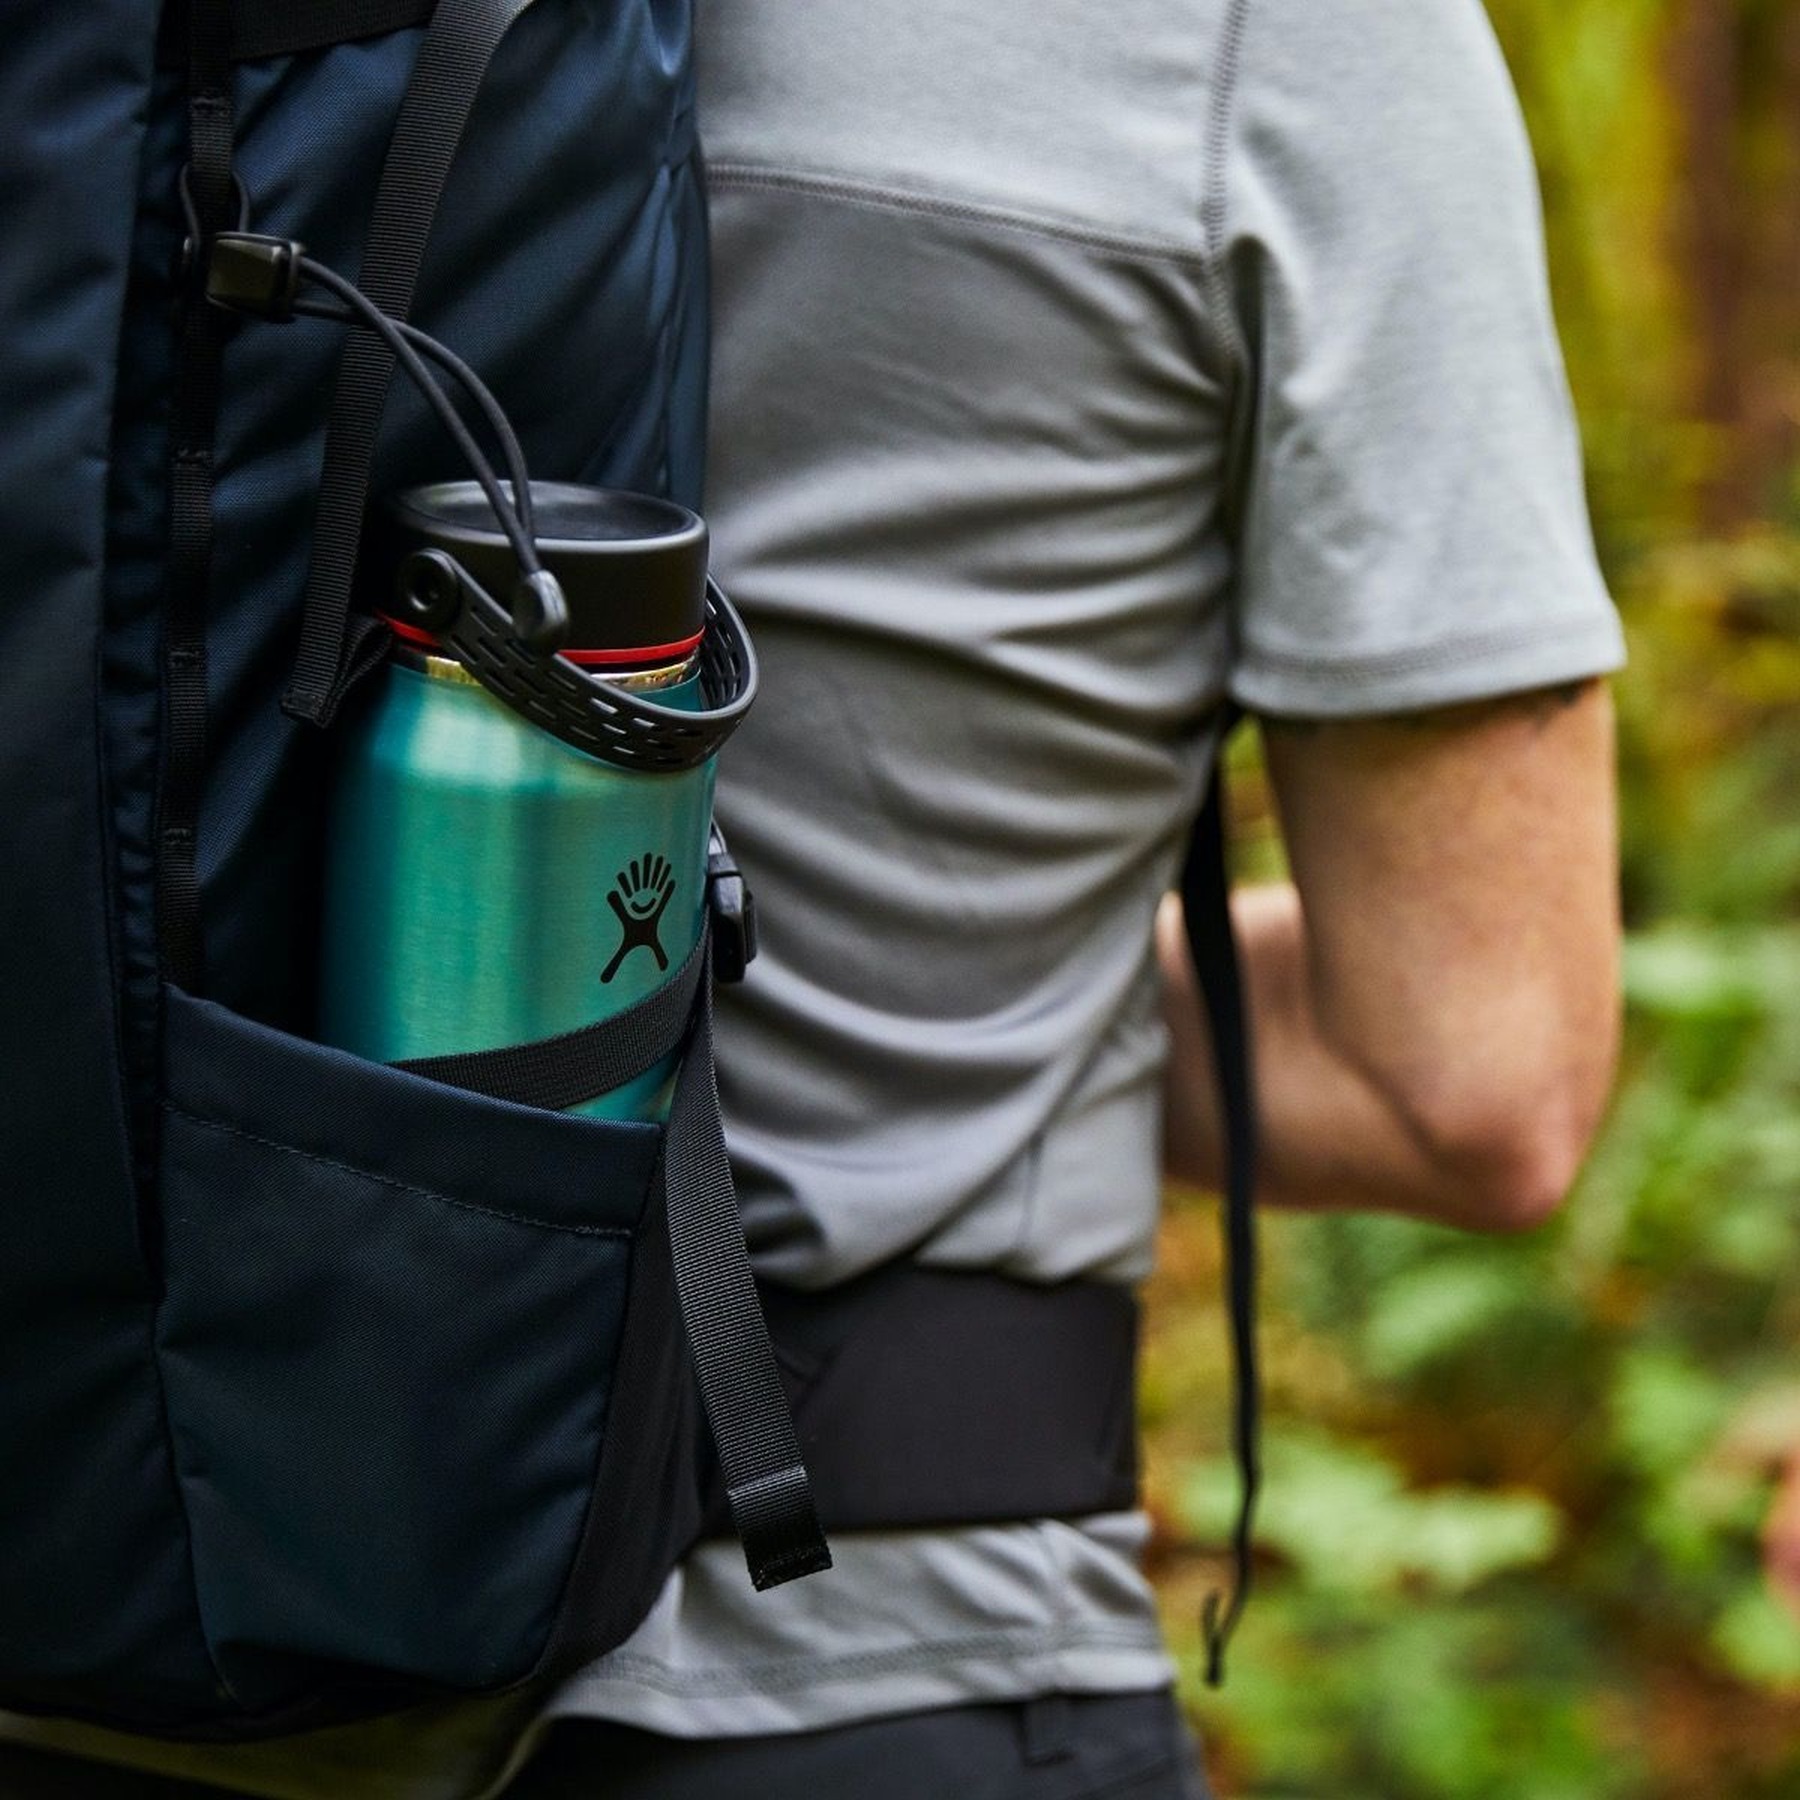 https://images.bike24.com/i/mb/65/ca/67/hydro-flask-32oz-lightweight-wide-mouth-trail-series-insulated-bottle-946ml-celestine-2-1203607.jpg